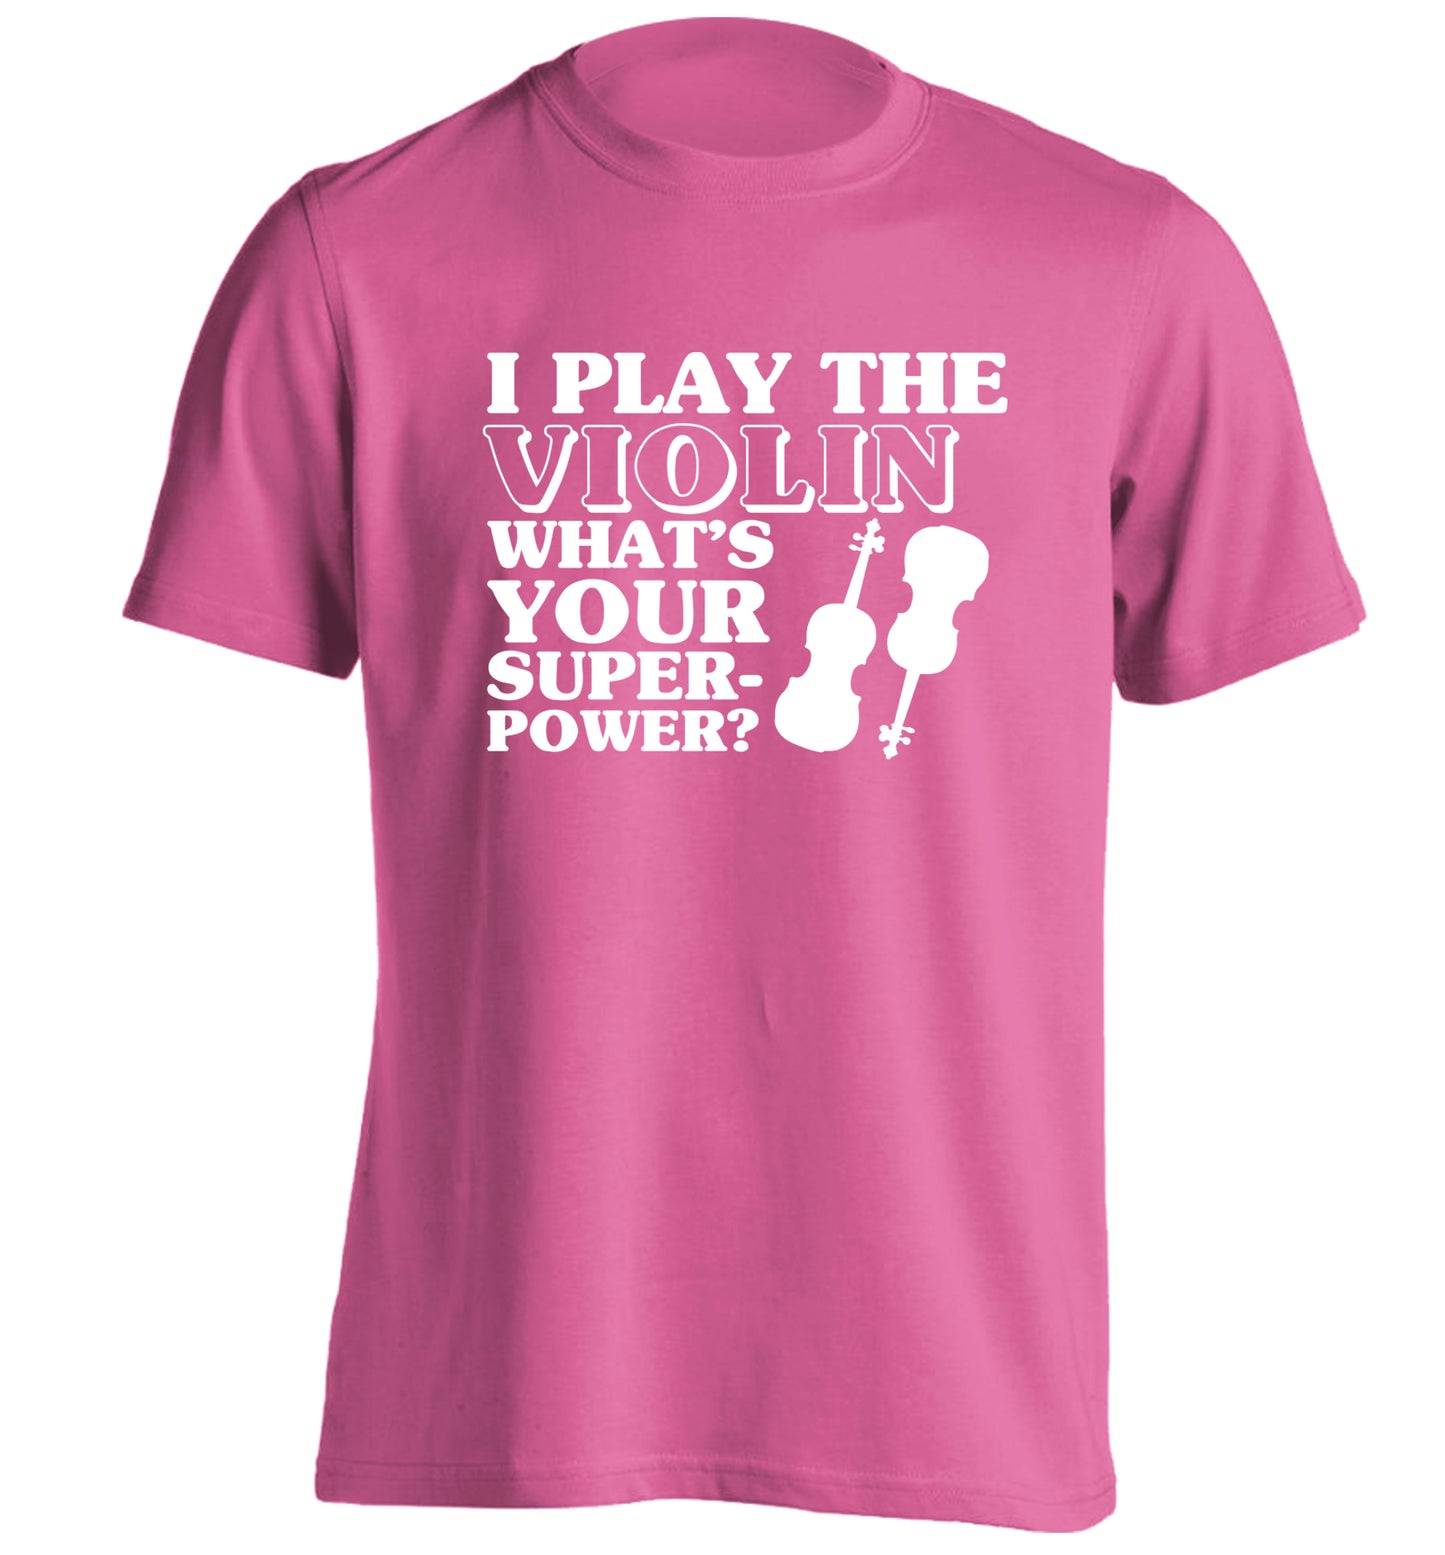 I Play Violin What's Your Superpower? adults unisex pink Tshirt 2XL